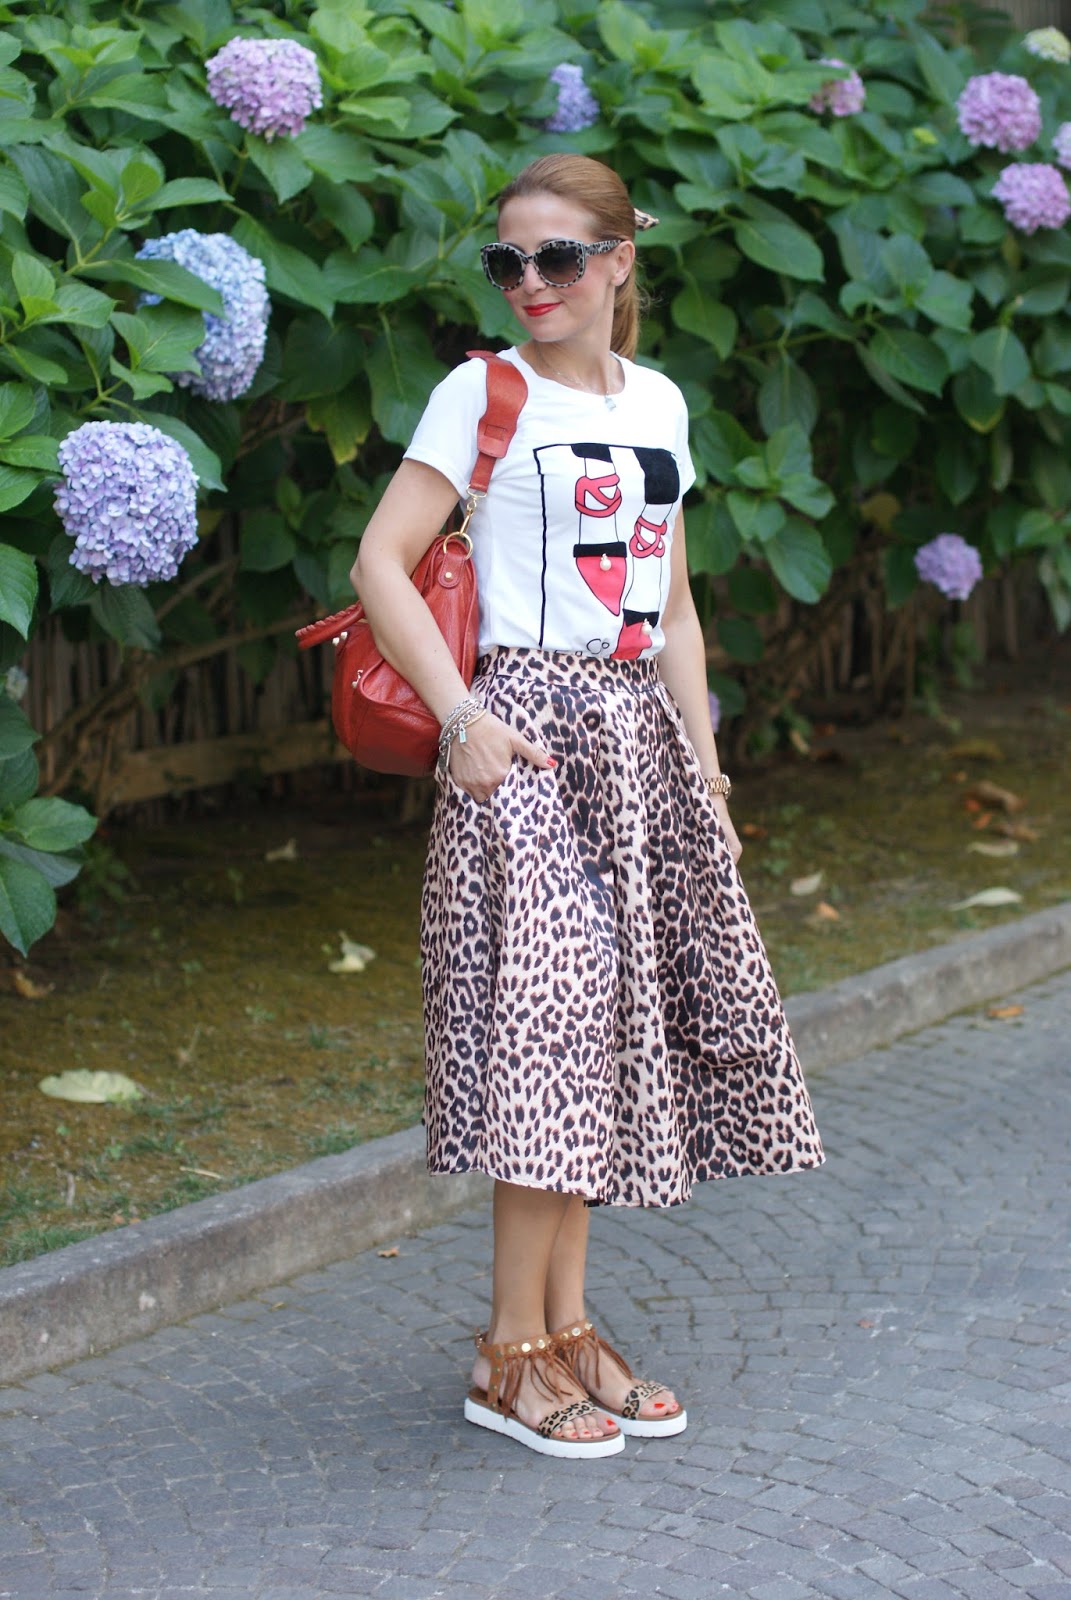 Leopard print is the new neutral with Dolce & Gabbana leopard sunglasses found on Giarre.com, leopard print midi skirt on Fashion and Cookies fashion blog, fashion blogger style